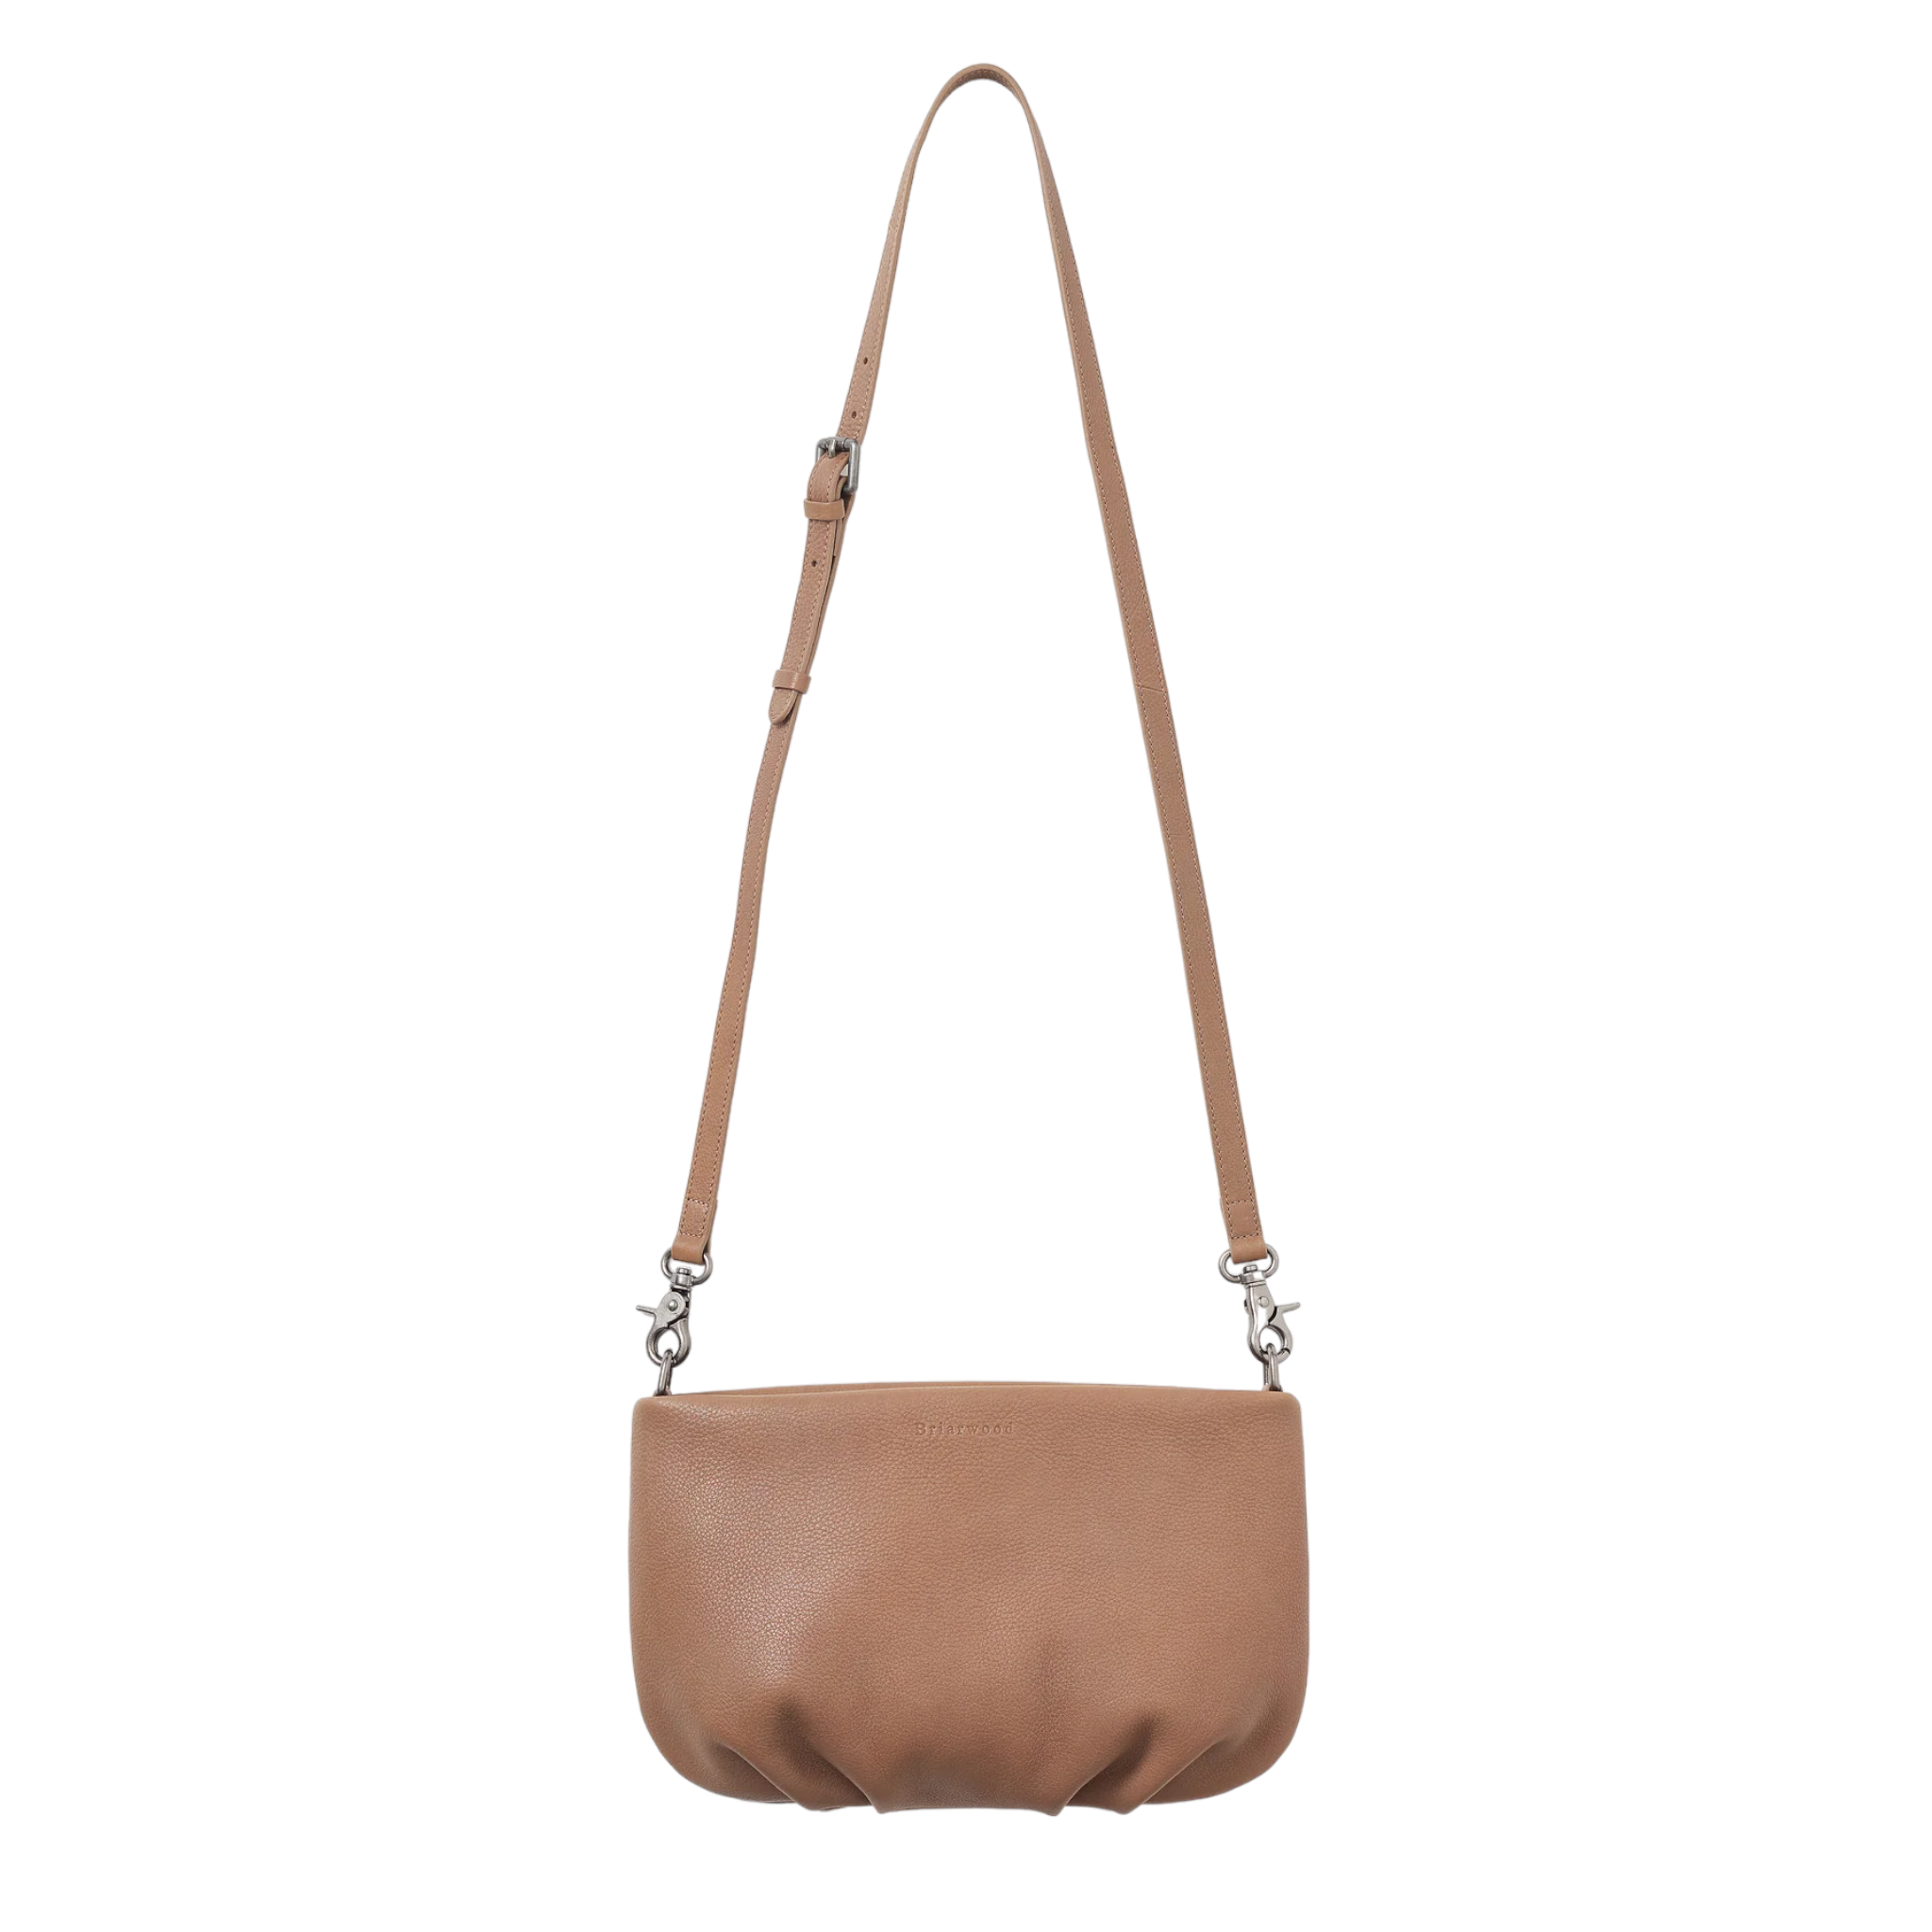 Shop Briarwood Sienna - with shoe&me - from Briarwood - Bags - Handbag, Summer, Winter, Womens - [collection]